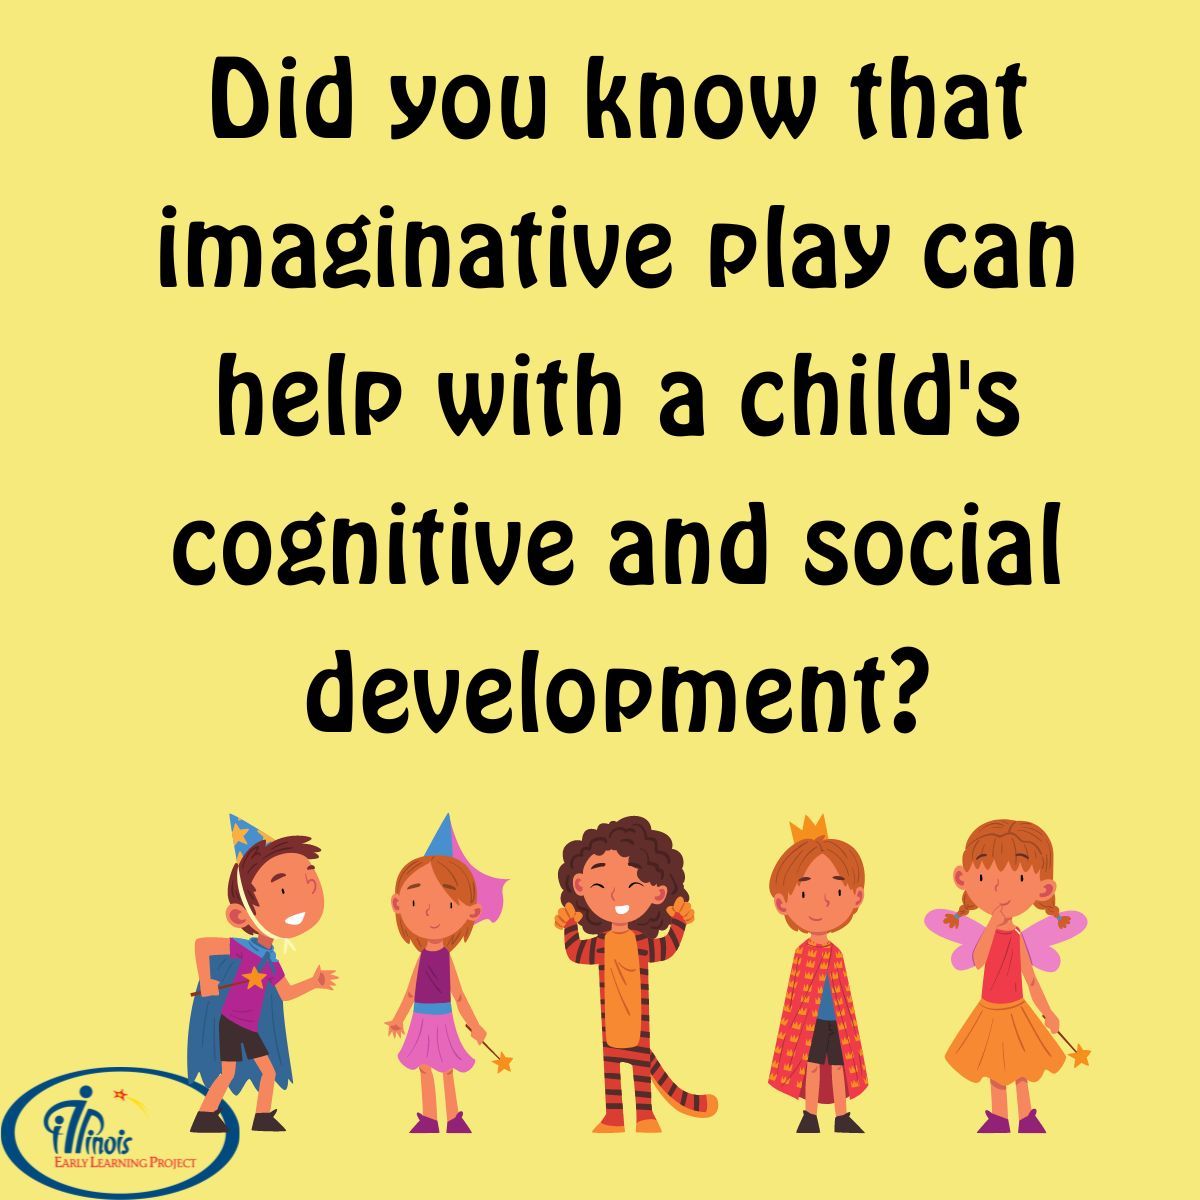 Did you know that imaginative play can help with a child's cognitive and social development? 
#ChildDevelopment #IllinoisEarlyLearning